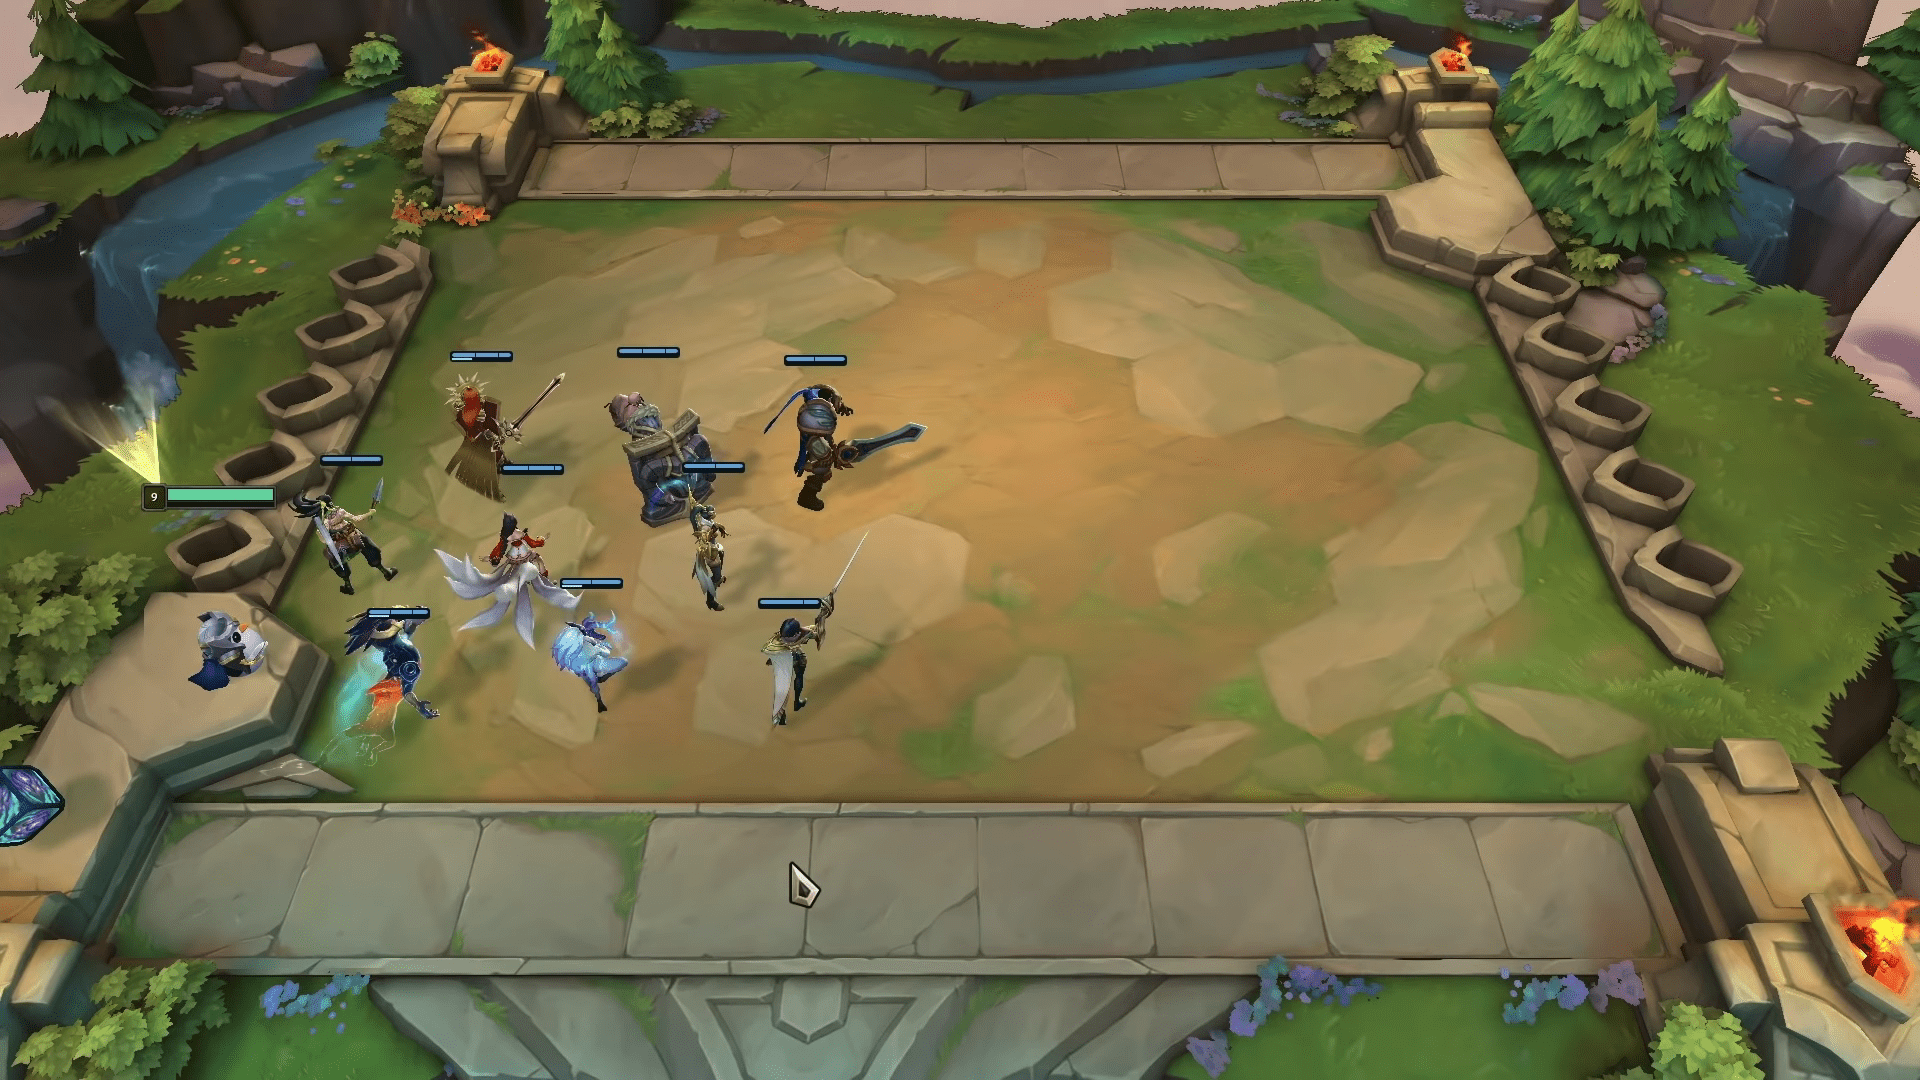 Teamfight Tactics Hits League Of Legends Live Servers With Long Queue Times Warning